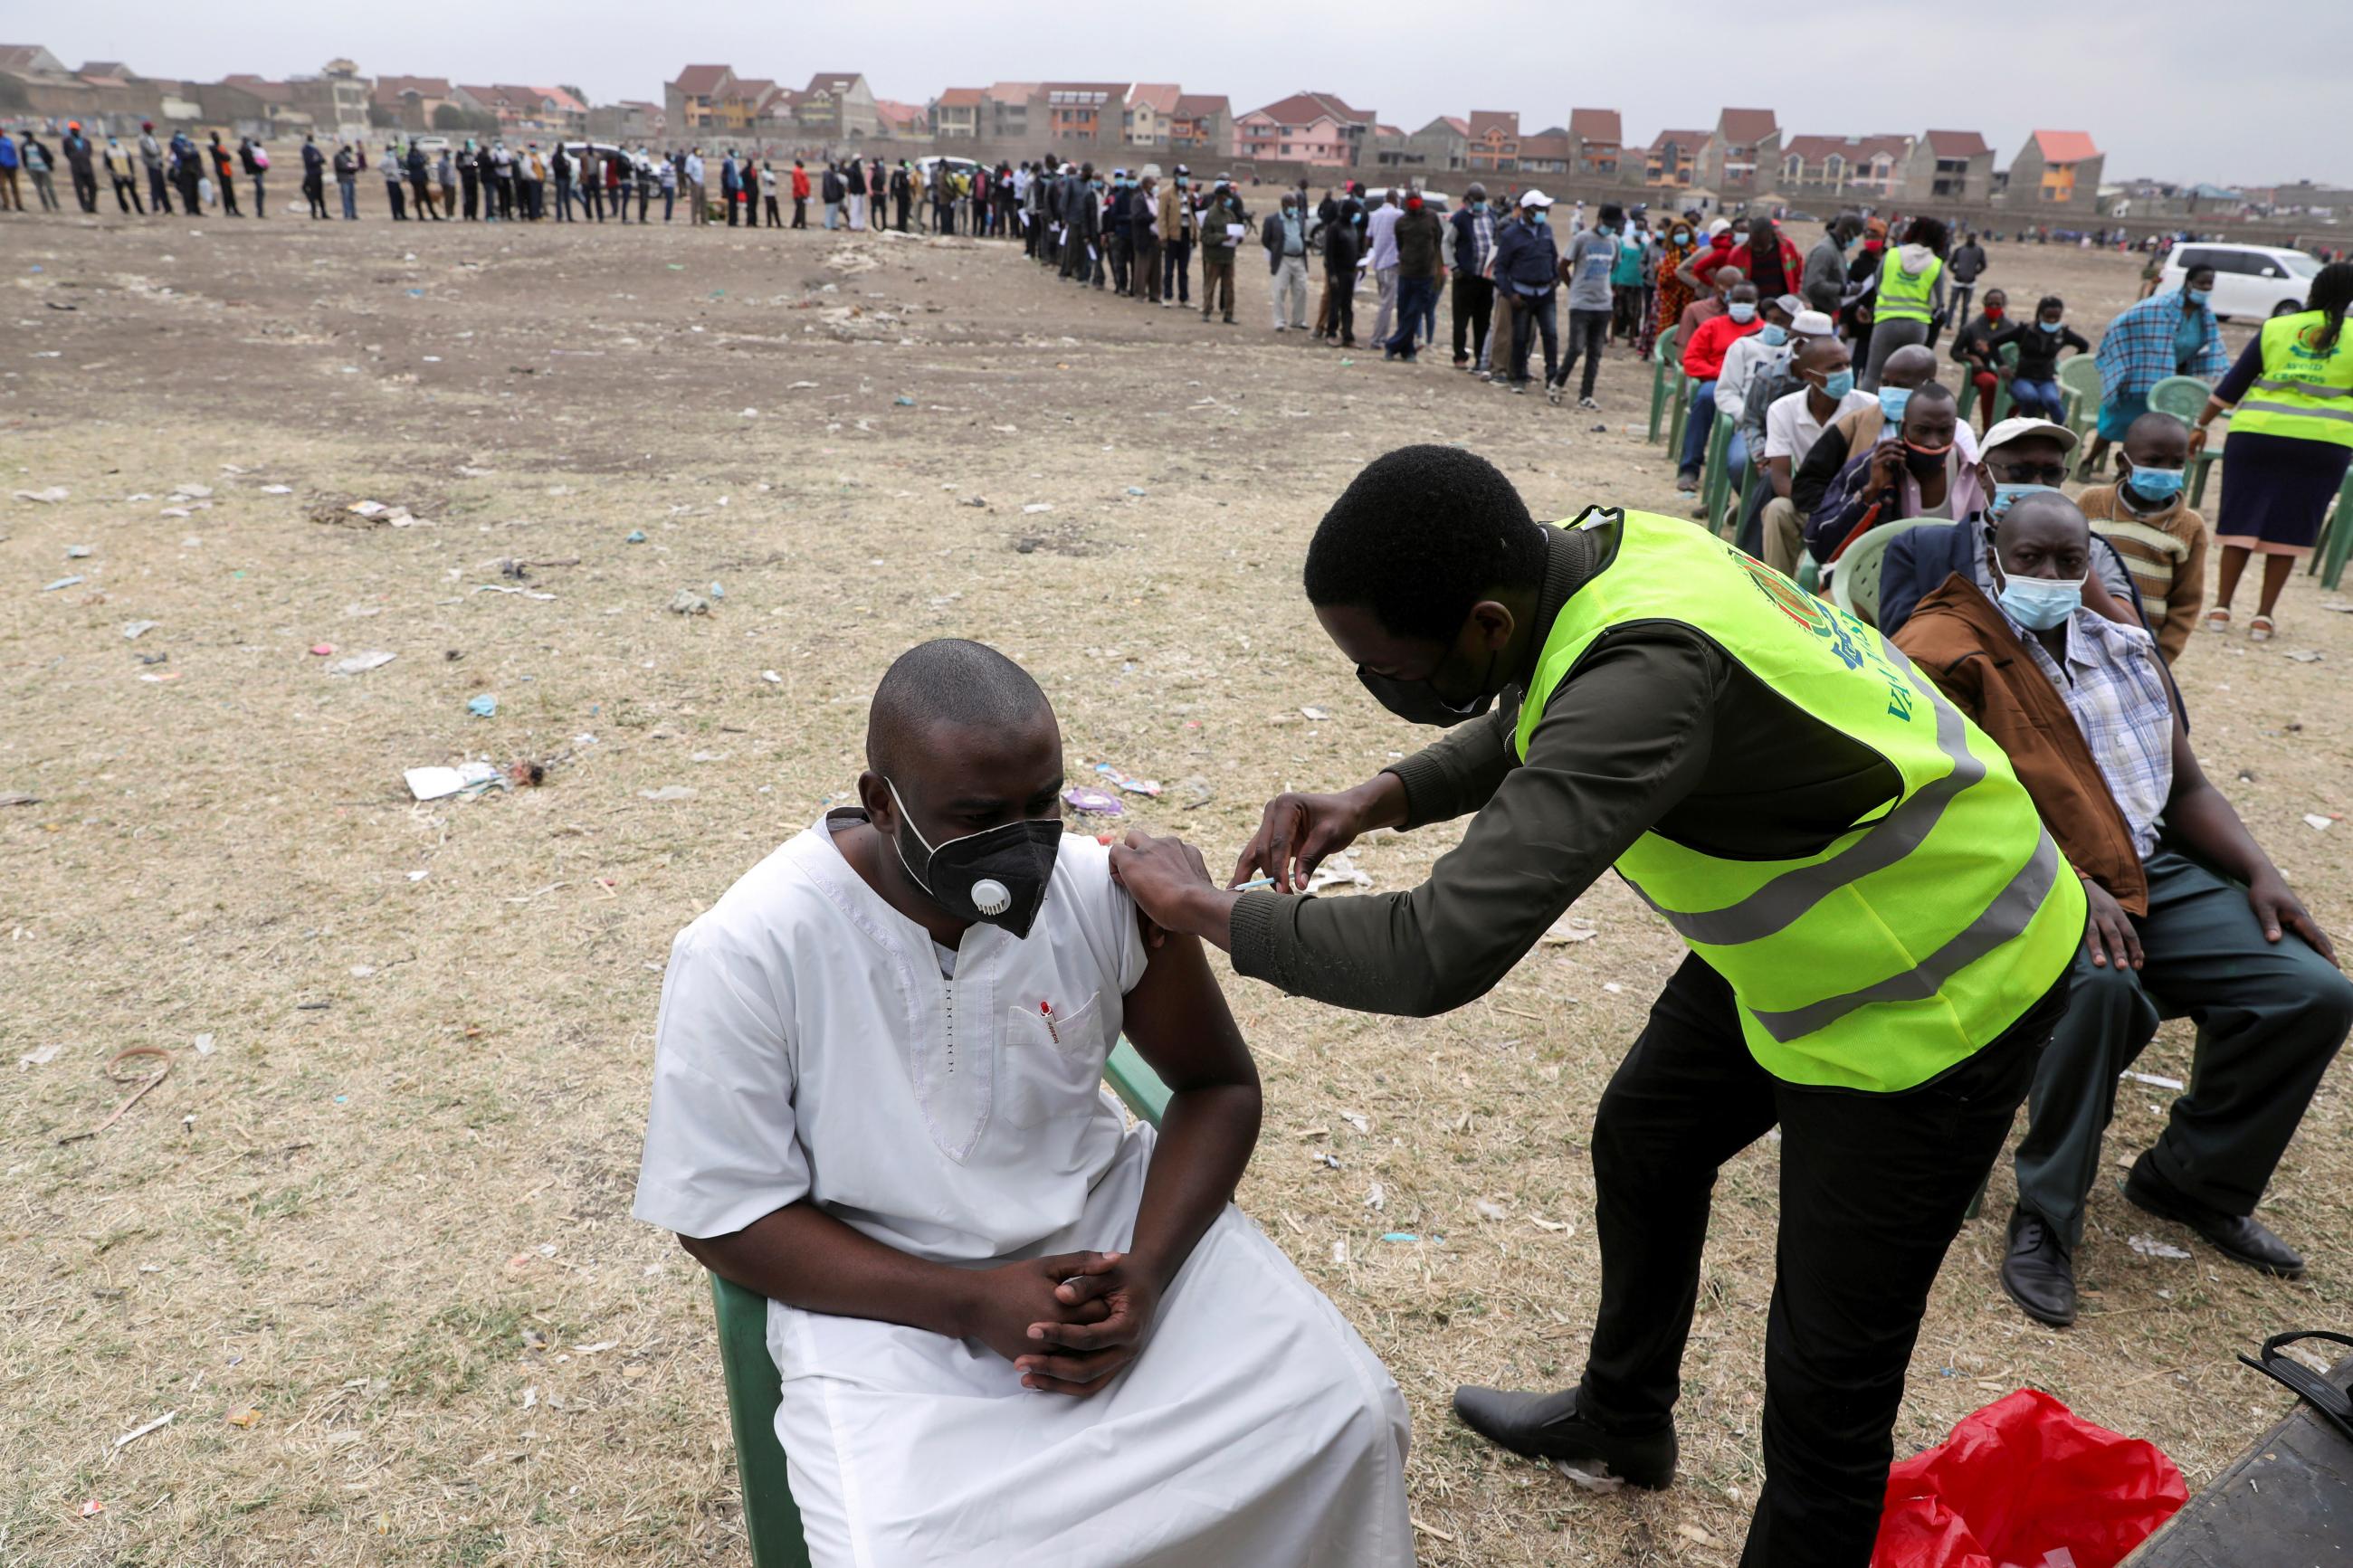 A health worker administers a UK-donated AstraZeneca/Oxford COVID-19 vaccine to a man in Nairobi, Kenya, as a long line of people wait behind them, on August 8, 2021. 